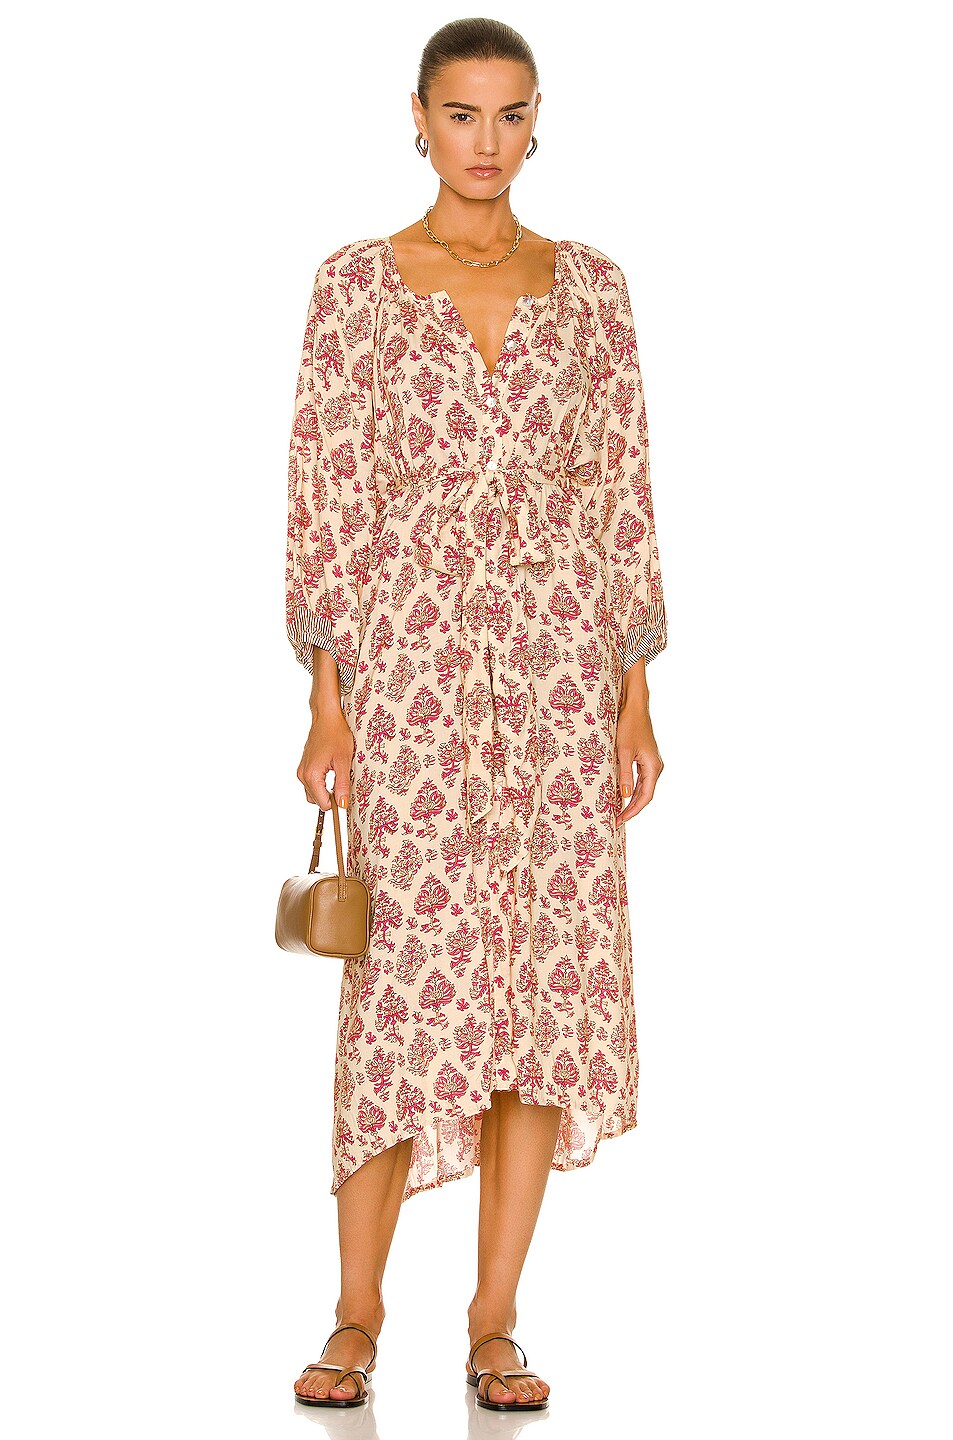 Image 1 of Natalie Martin Alex Dress With Sash in Cyprus Print Pink